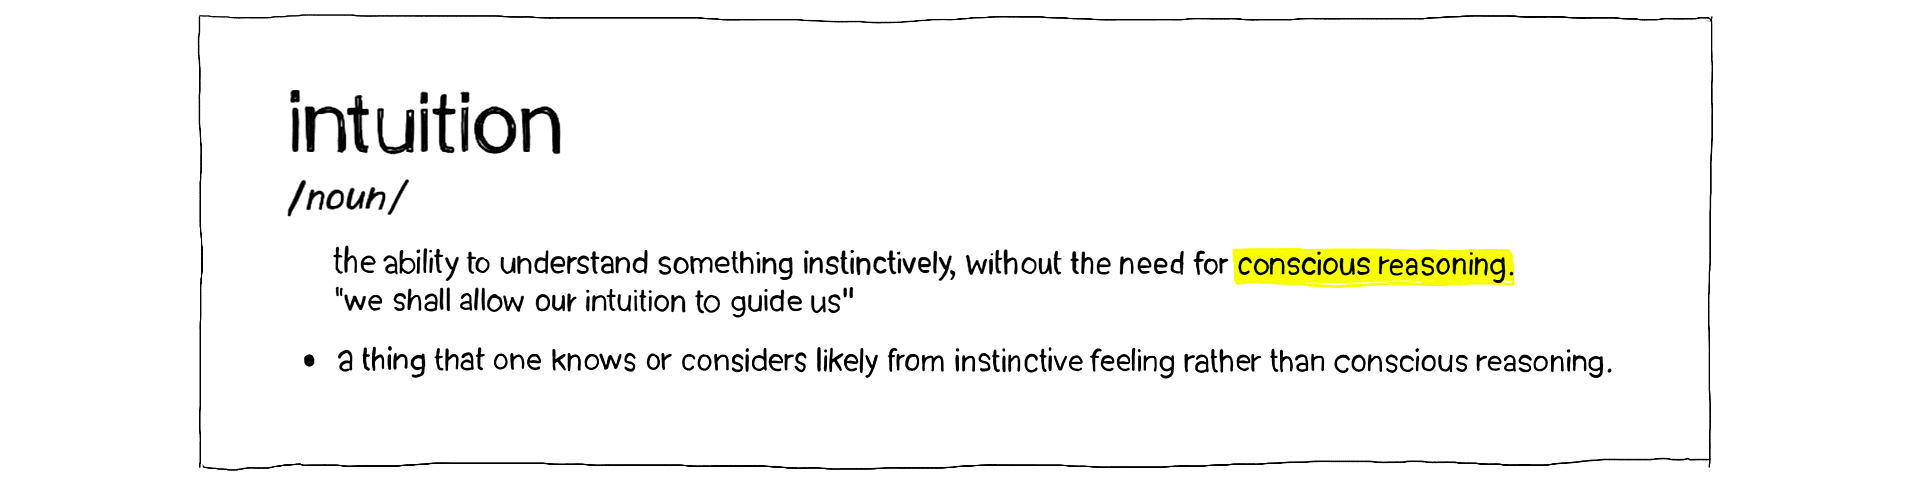 Dictionary definition of Intuition